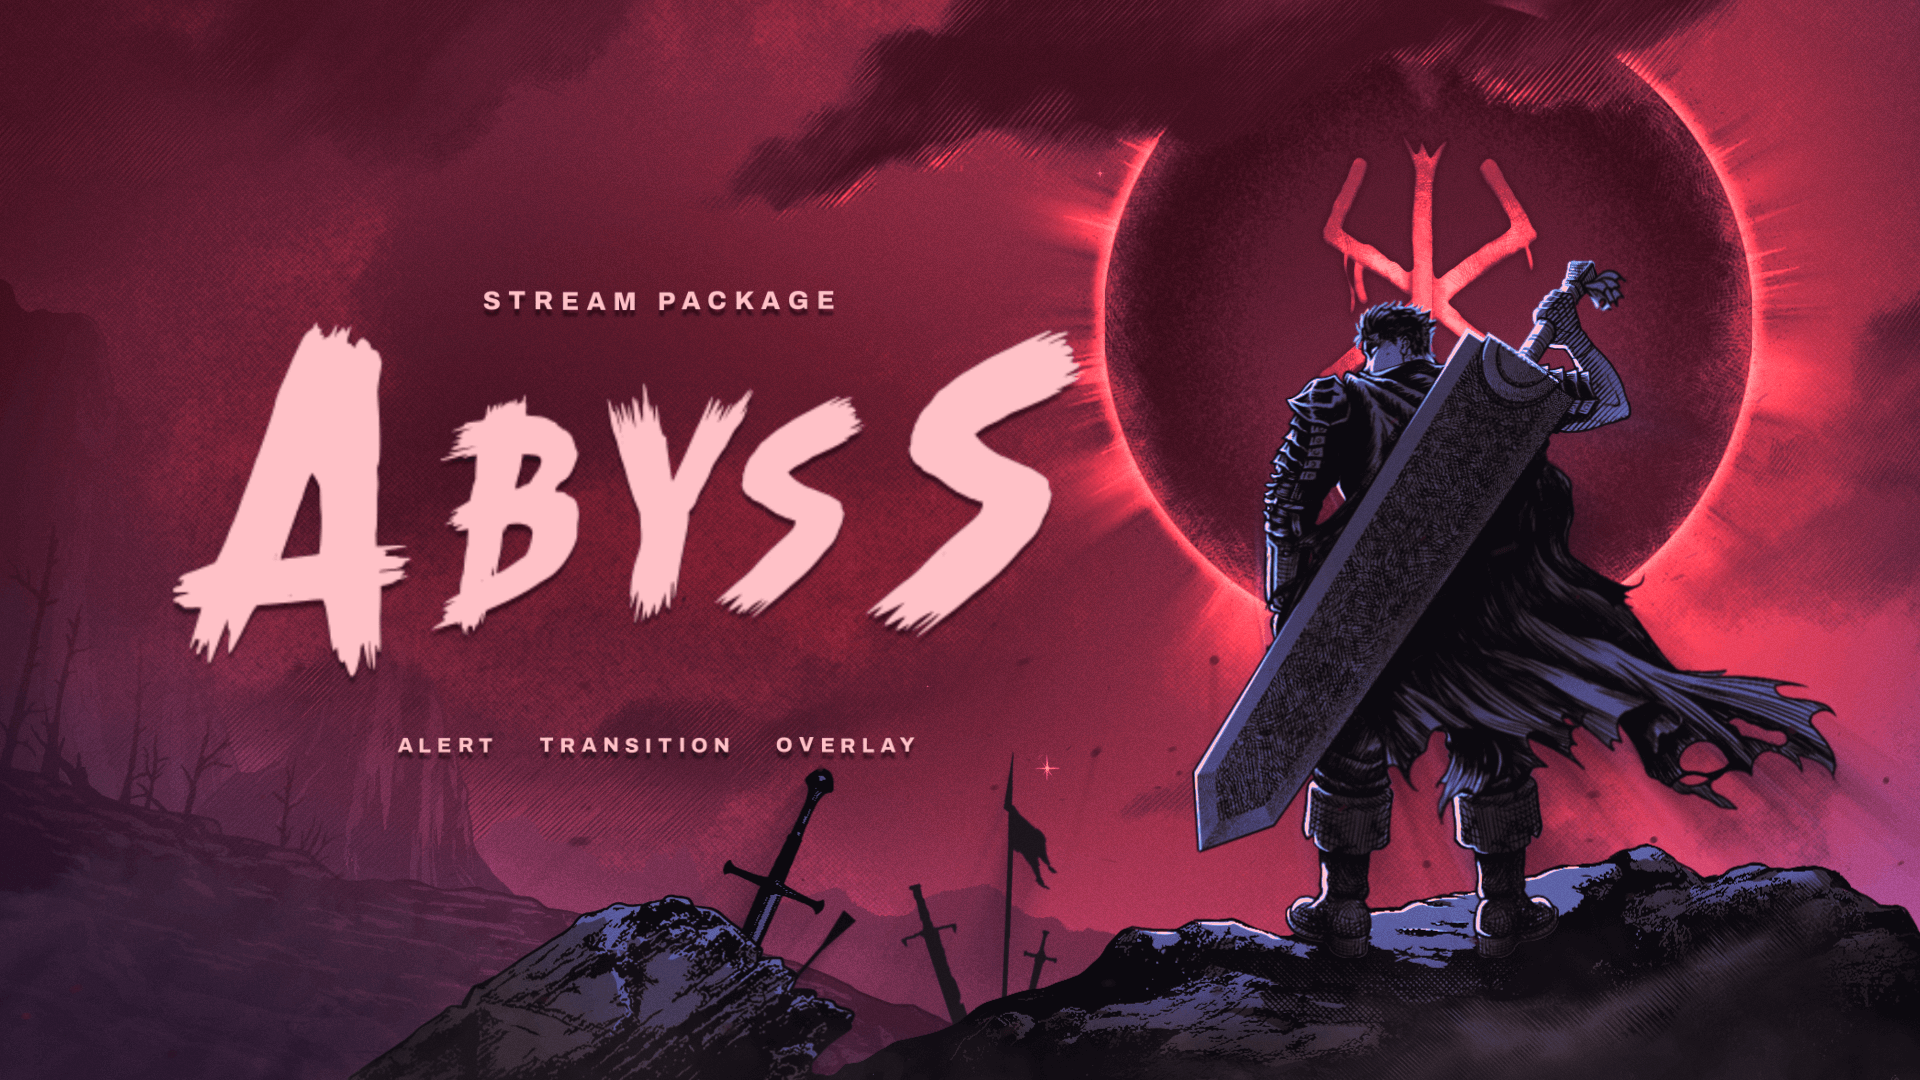 Abyss -  Berserk Twitch Overlay and Alerts Package for OBS Studio